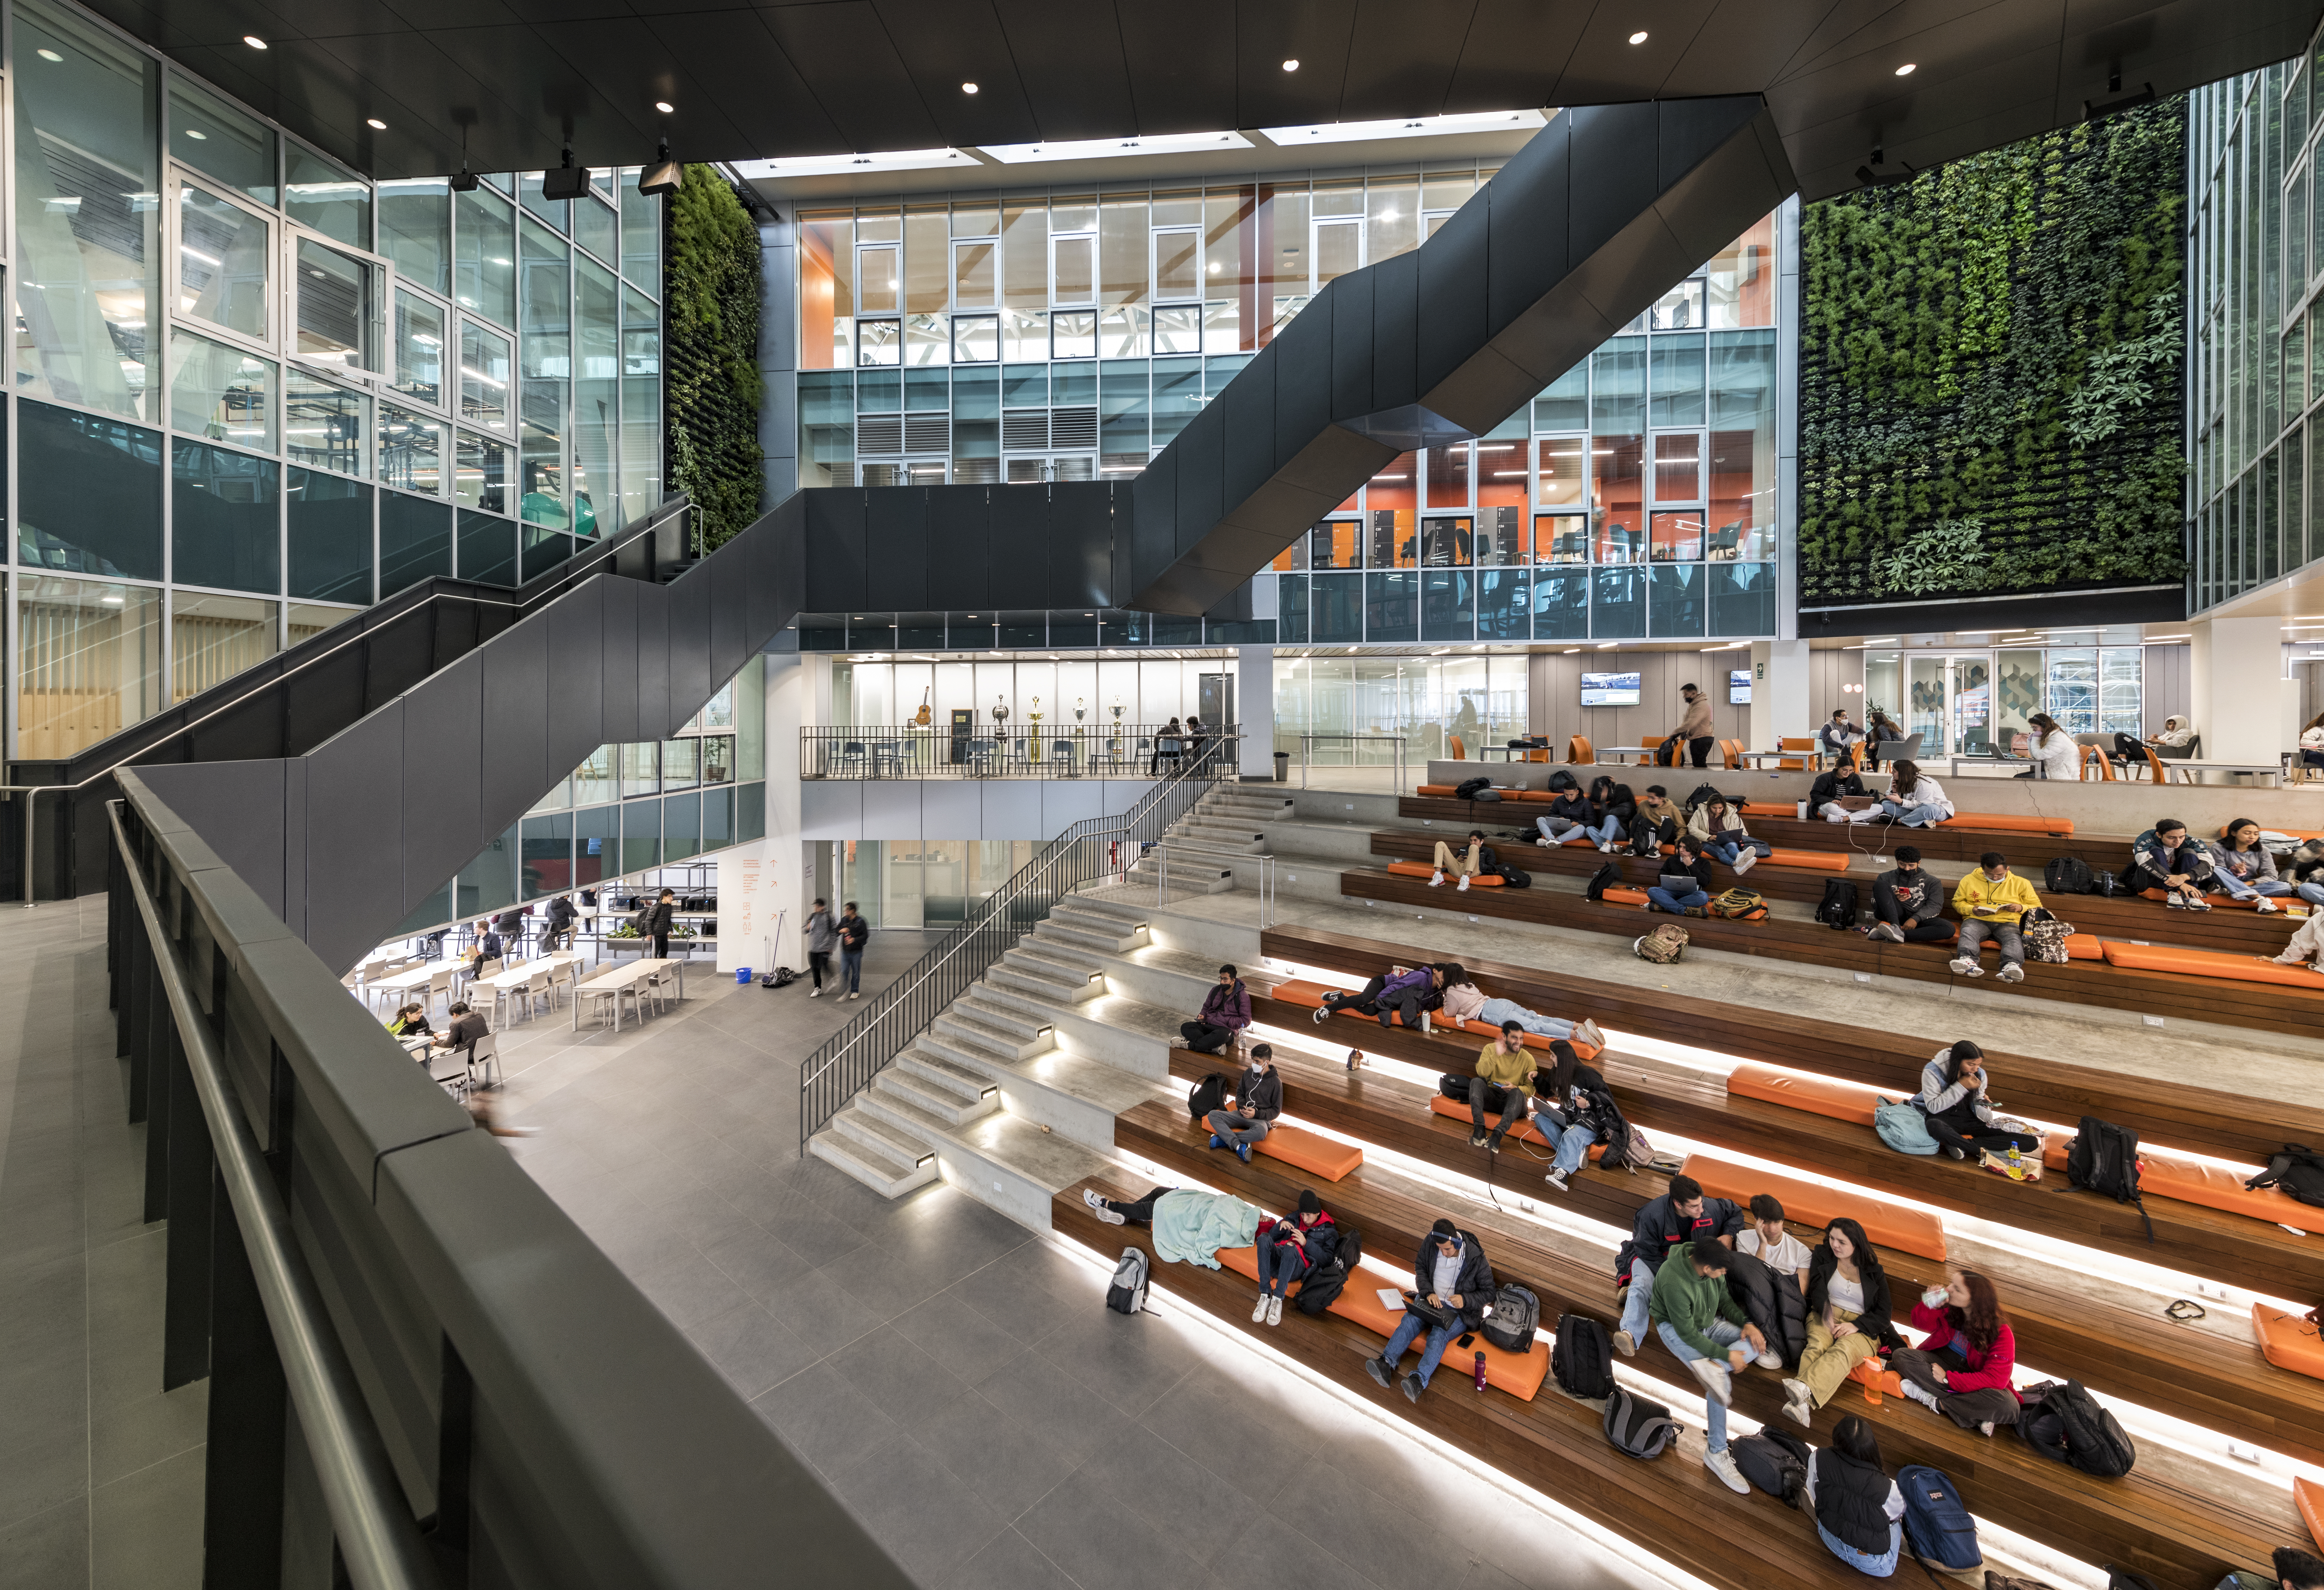 Color photo. Students sit on terraced seating in wide atrium in front of green wall. stairs wind around the perimeter of atrium. on upper levels, exercise rooms are visible